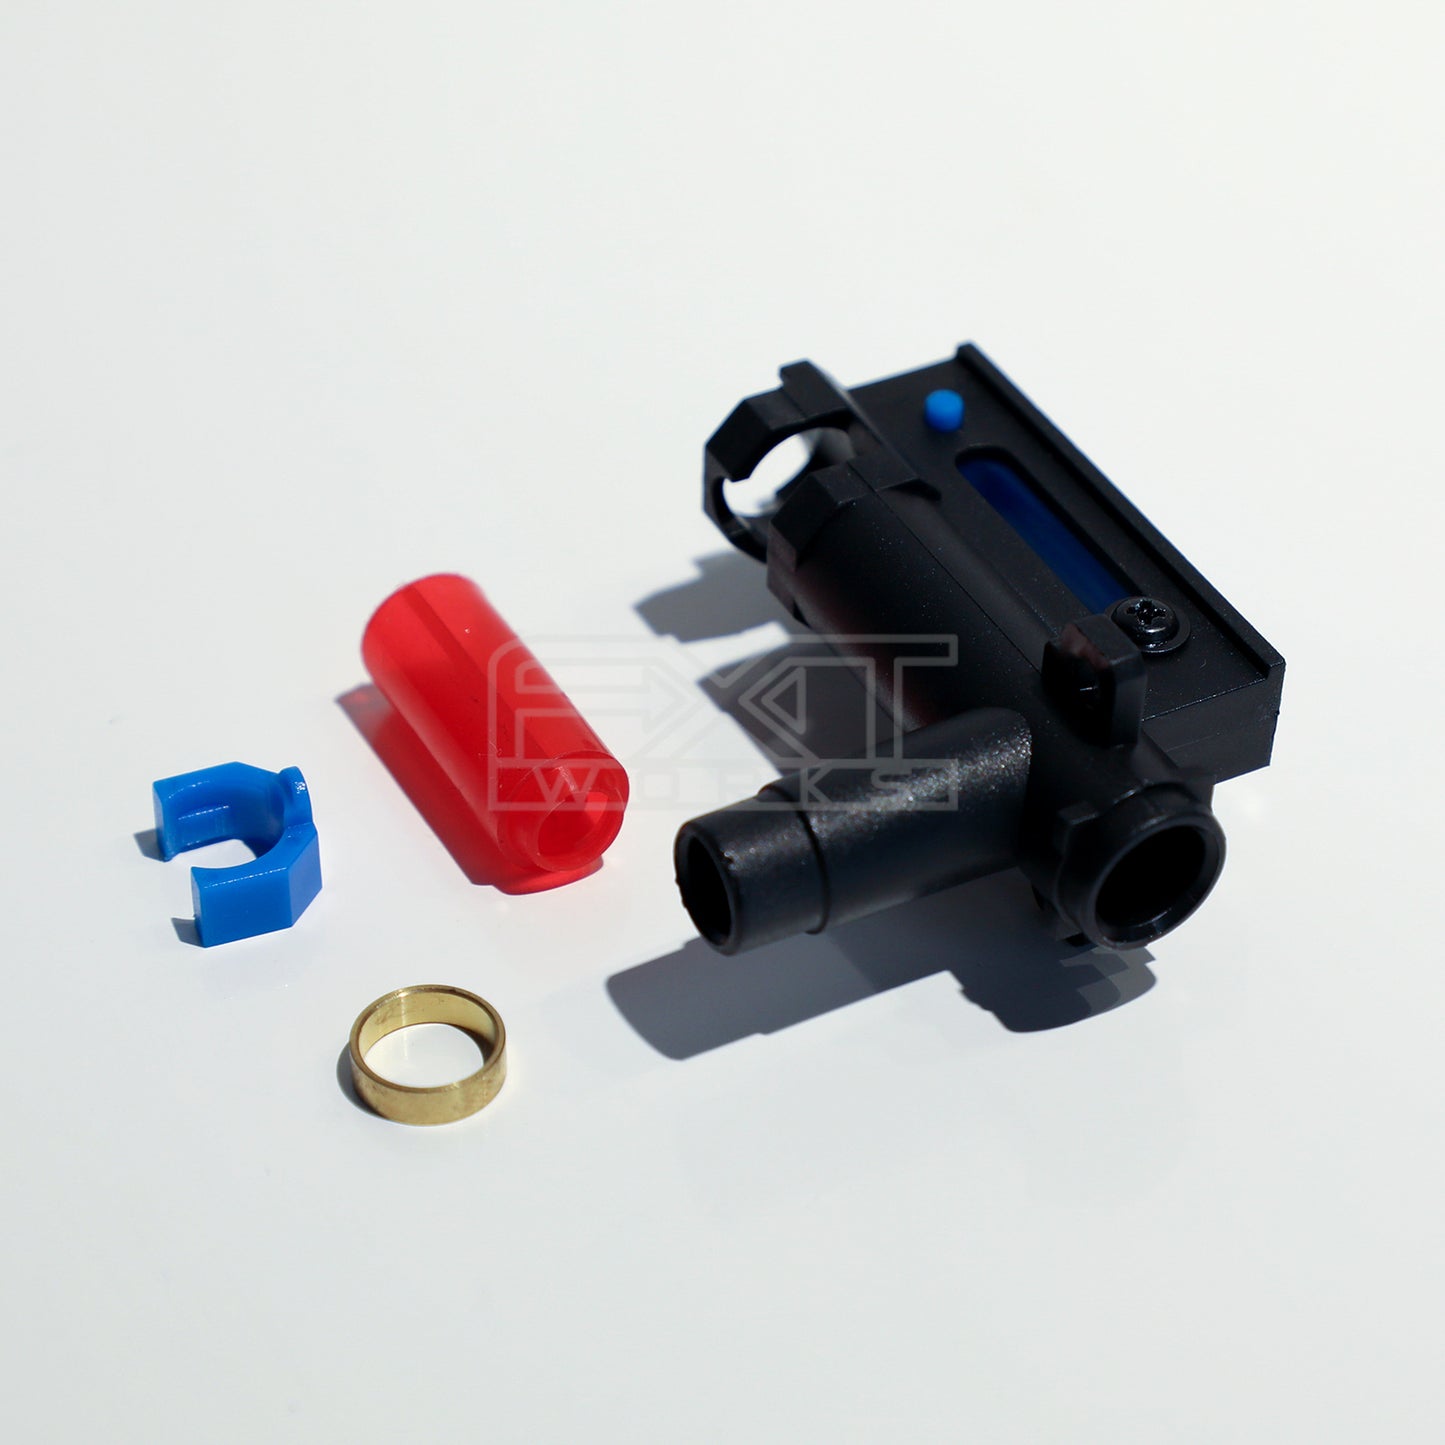 Plastic Hop Up Chamber for AK Series Airsoft AEG Rifles